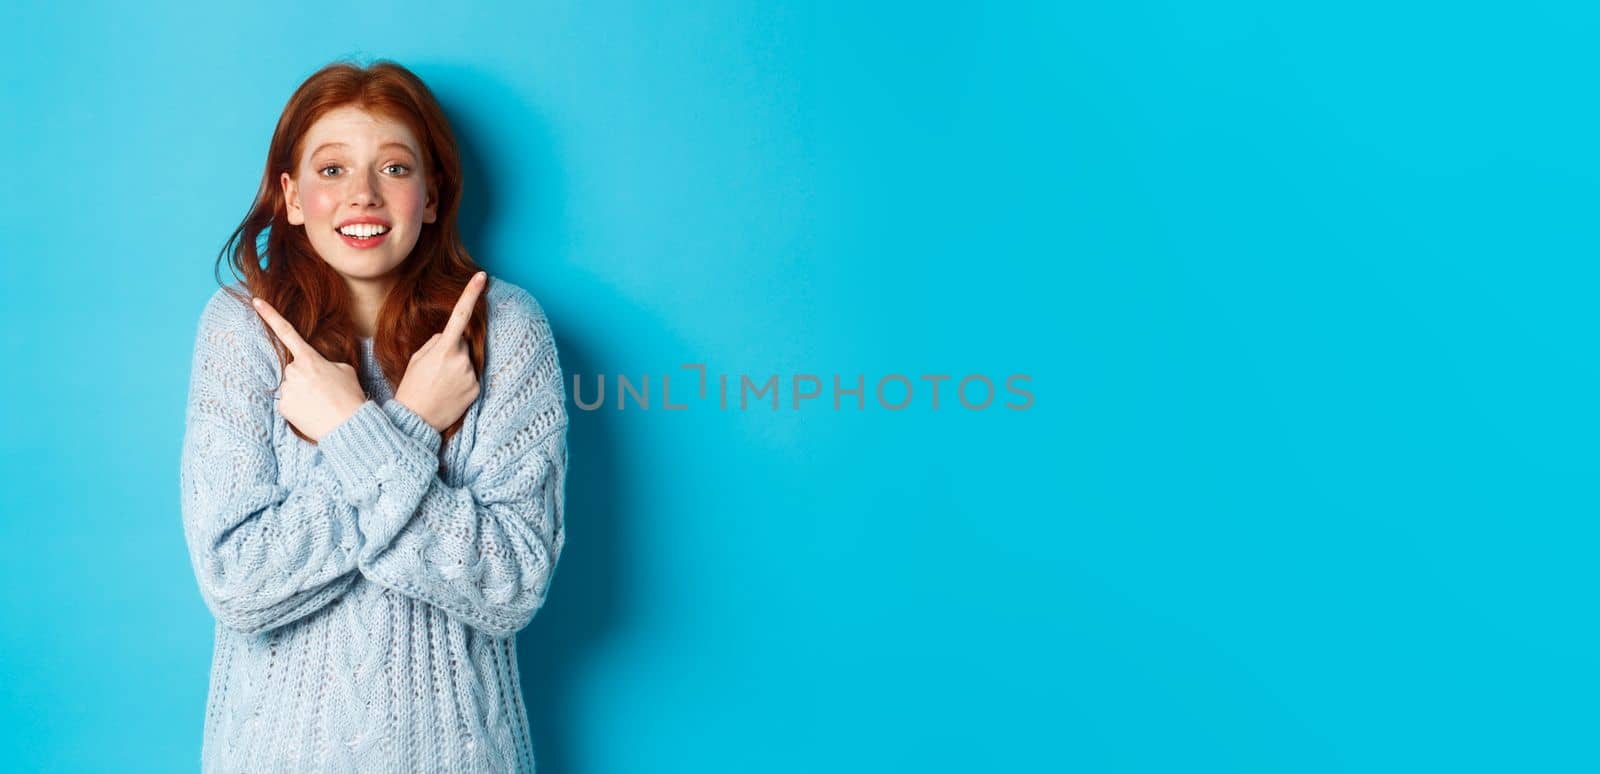 Excited redhead girl pointing fingers sideways, showing two choices and looking tempted at camera, standing against blue background.